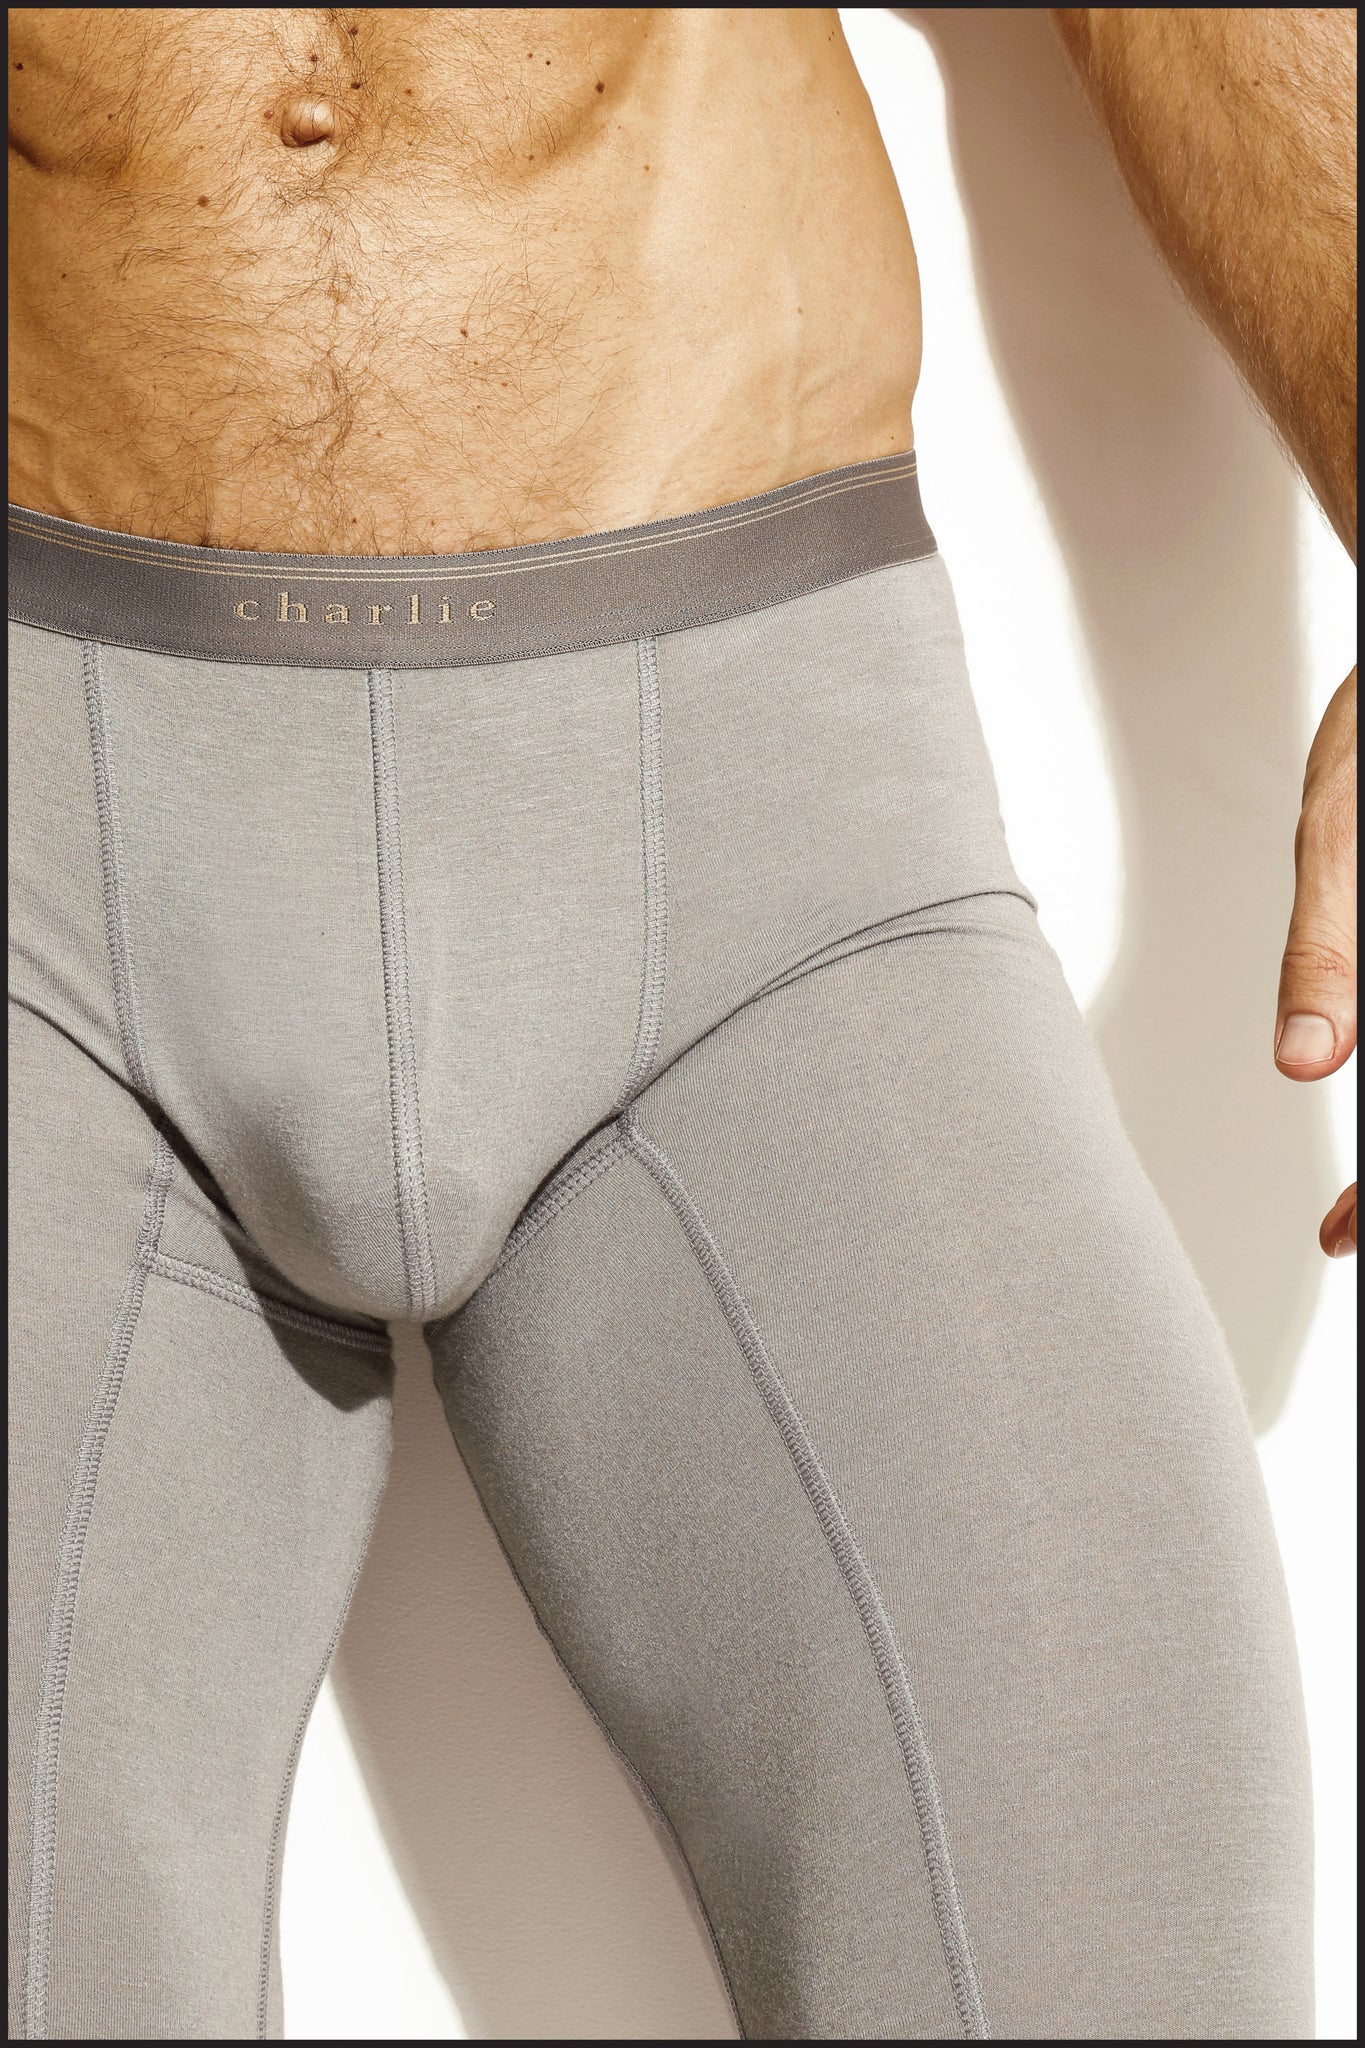 She's Single - Gift Guide - Cashmere Underwear for Him - Wood Underwear